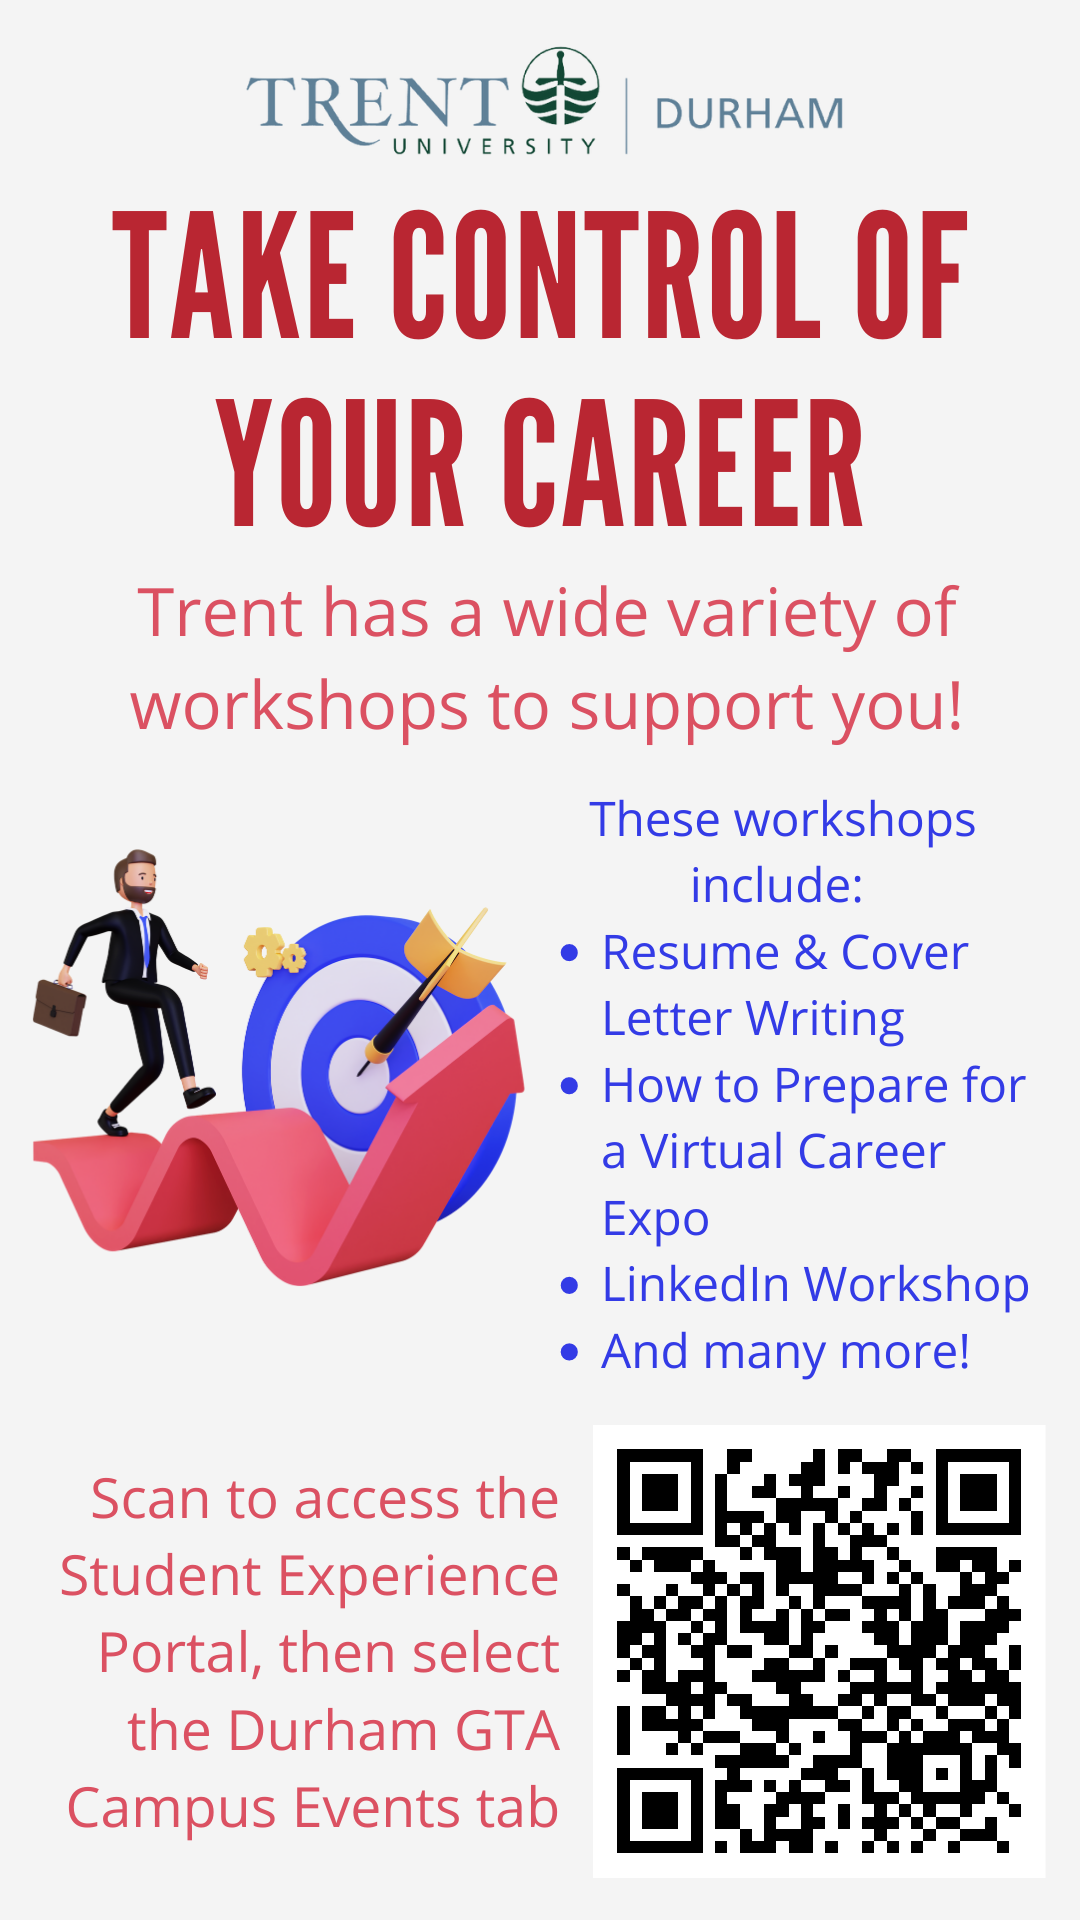 Poster describing available Career Services workshops: Resume and Cover Letter Writing, How to Prepare for a Virtual Career Expo, LinkedIn Workshop, and more.